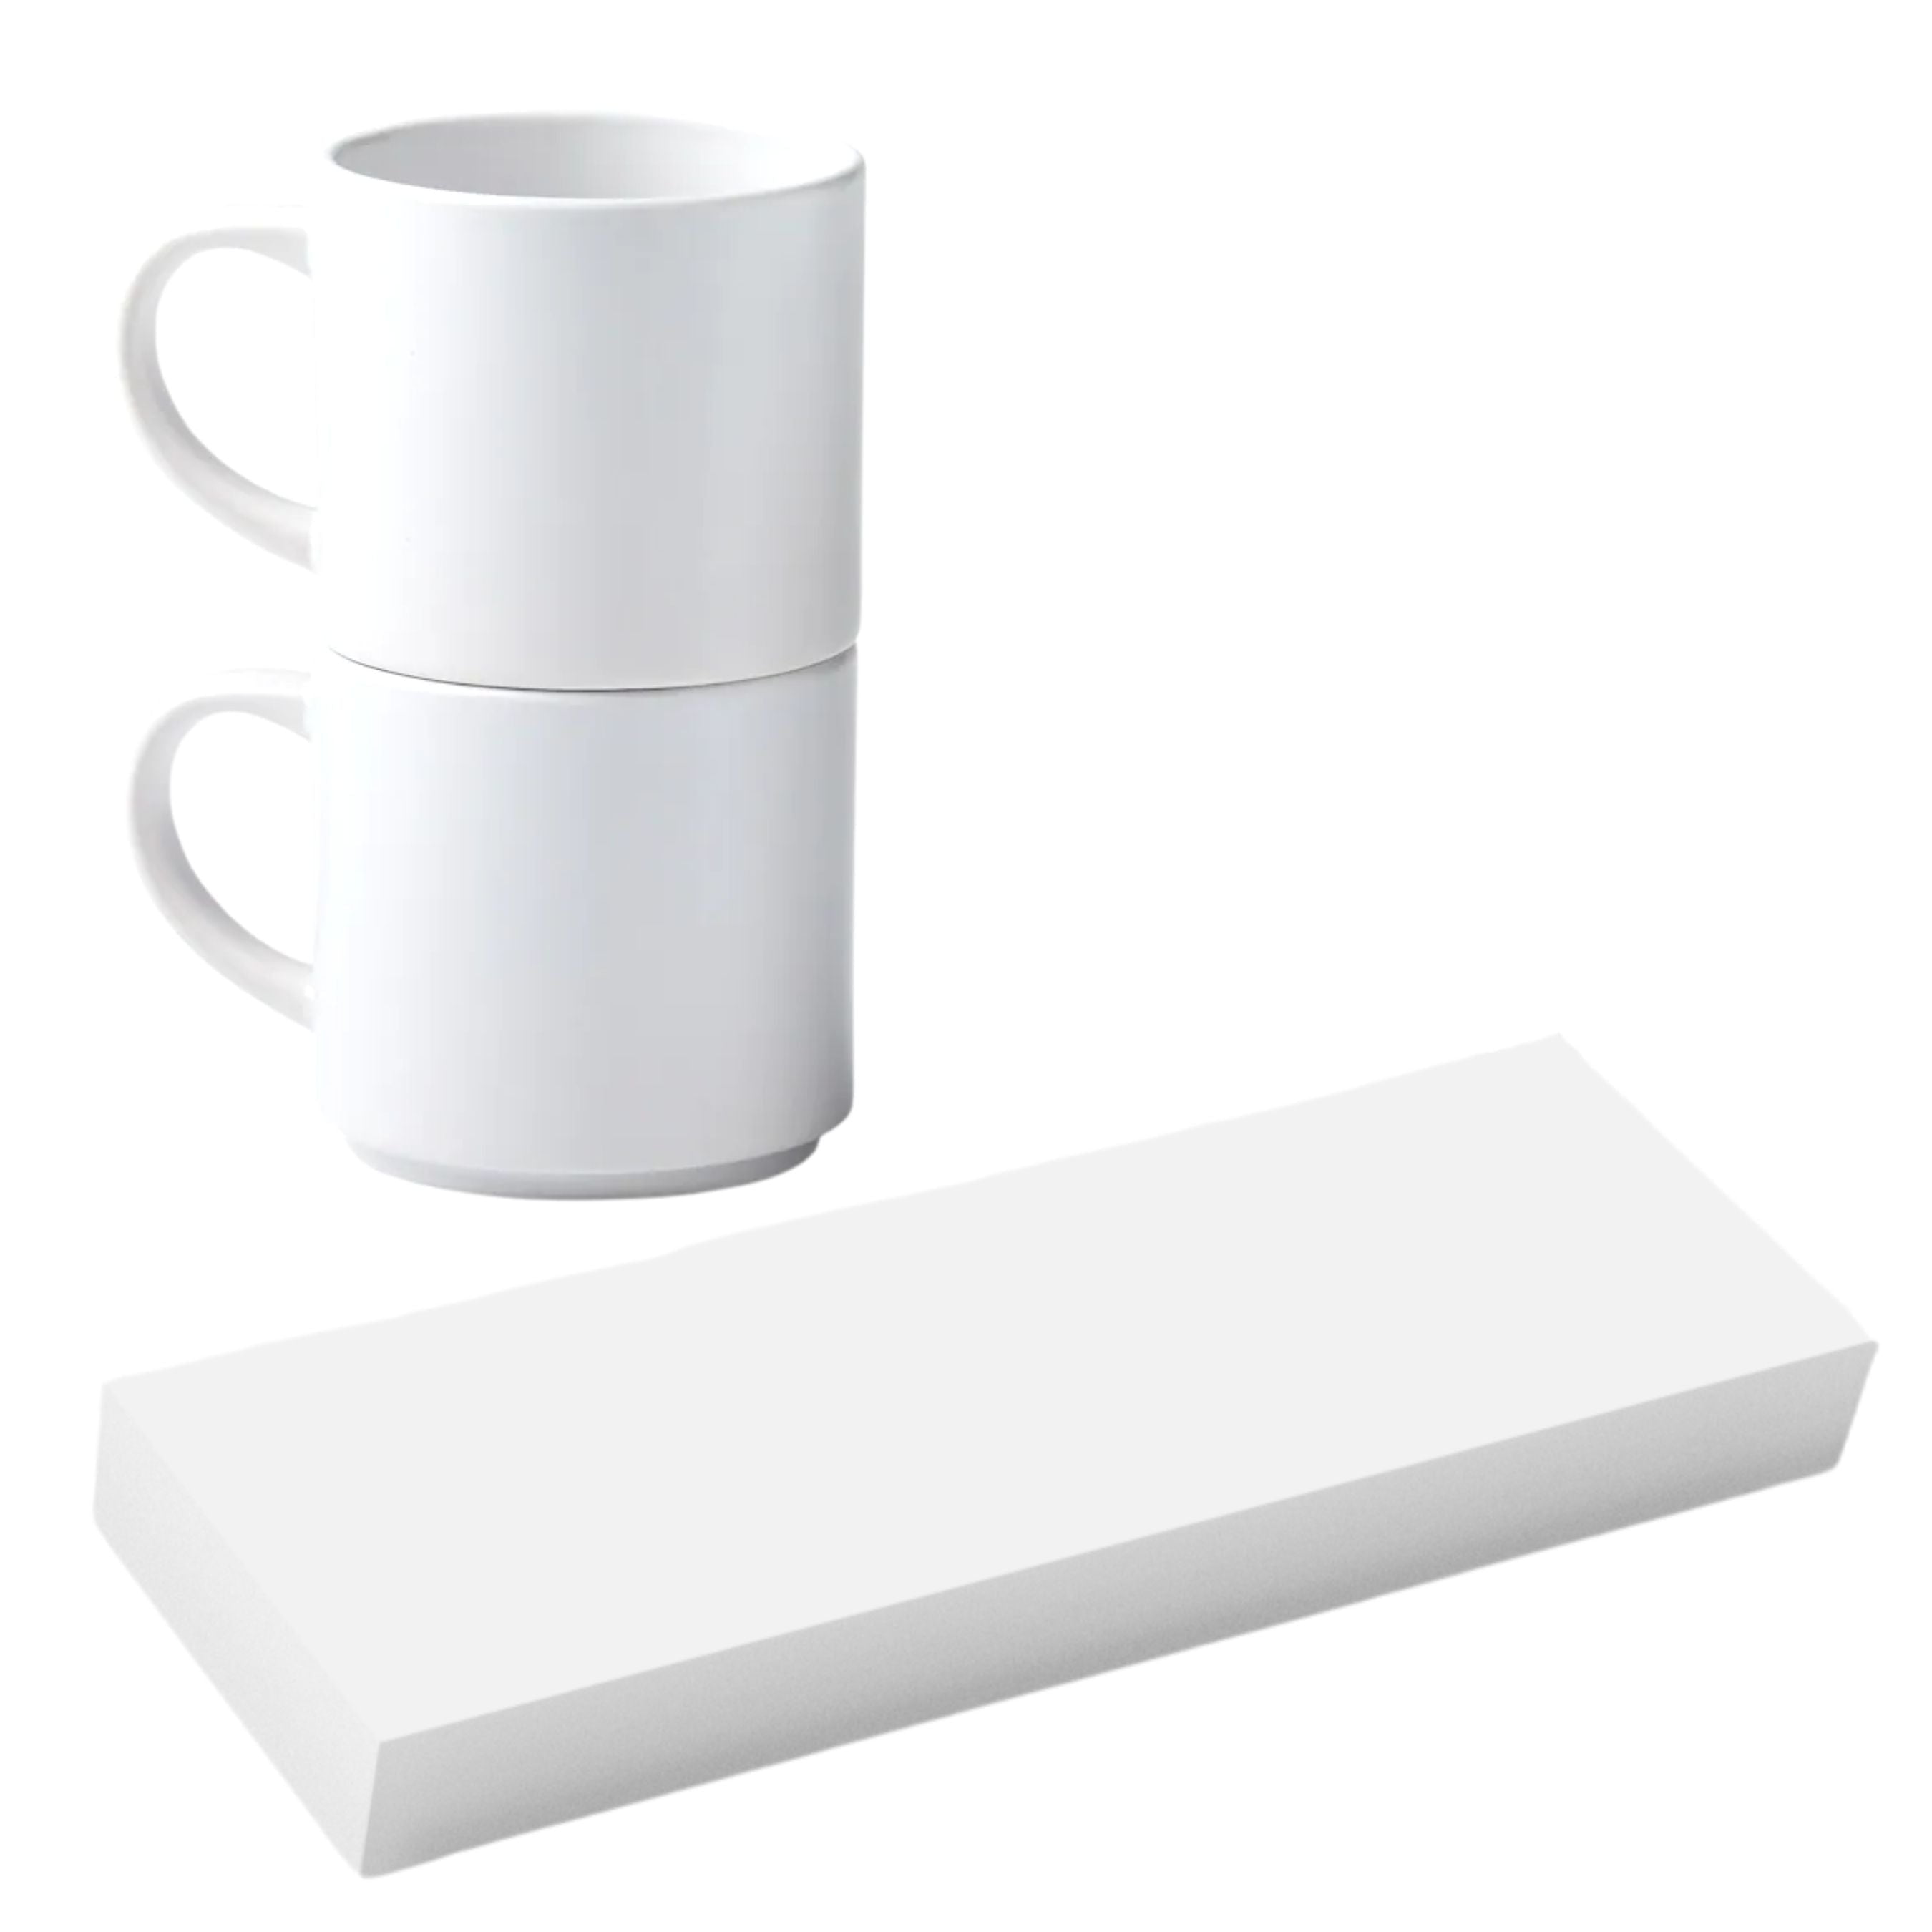 Precut Butcher Paper for Sublimation, Heat Press, Smooth, Uncoated (11 oz /  12 oz Mugs, 100)